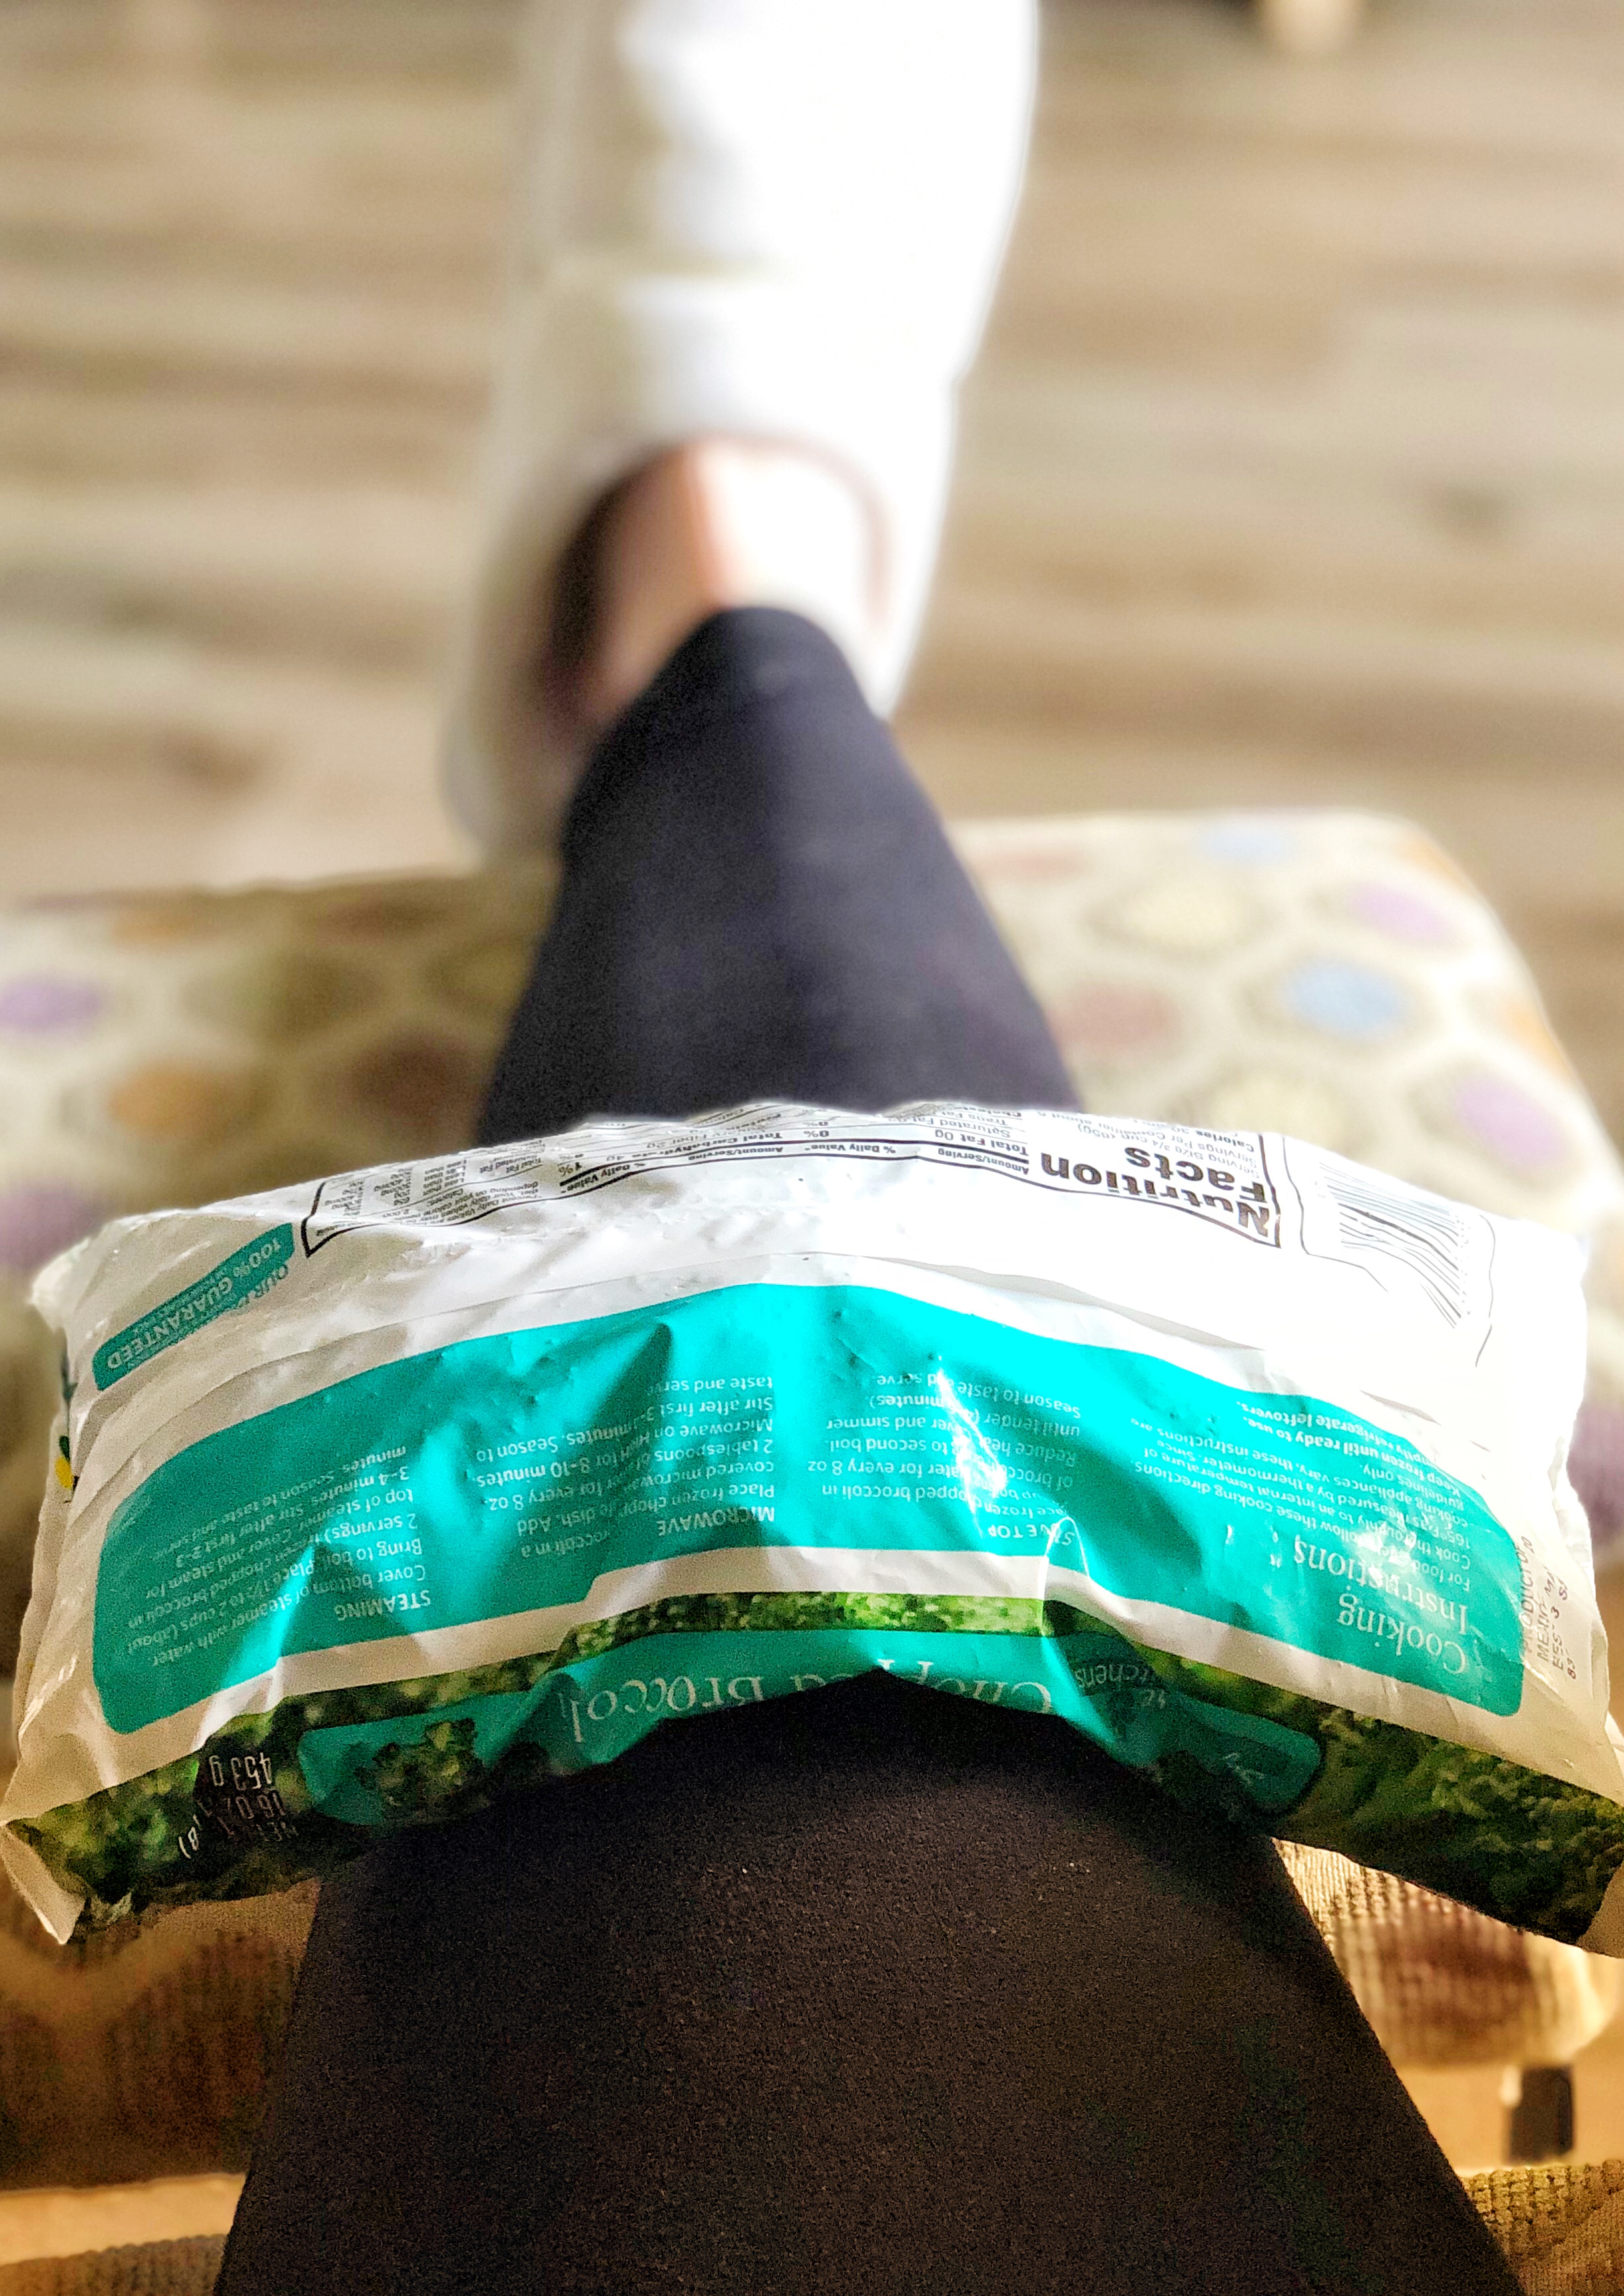 Using frozen broccoli to ice a knee injury